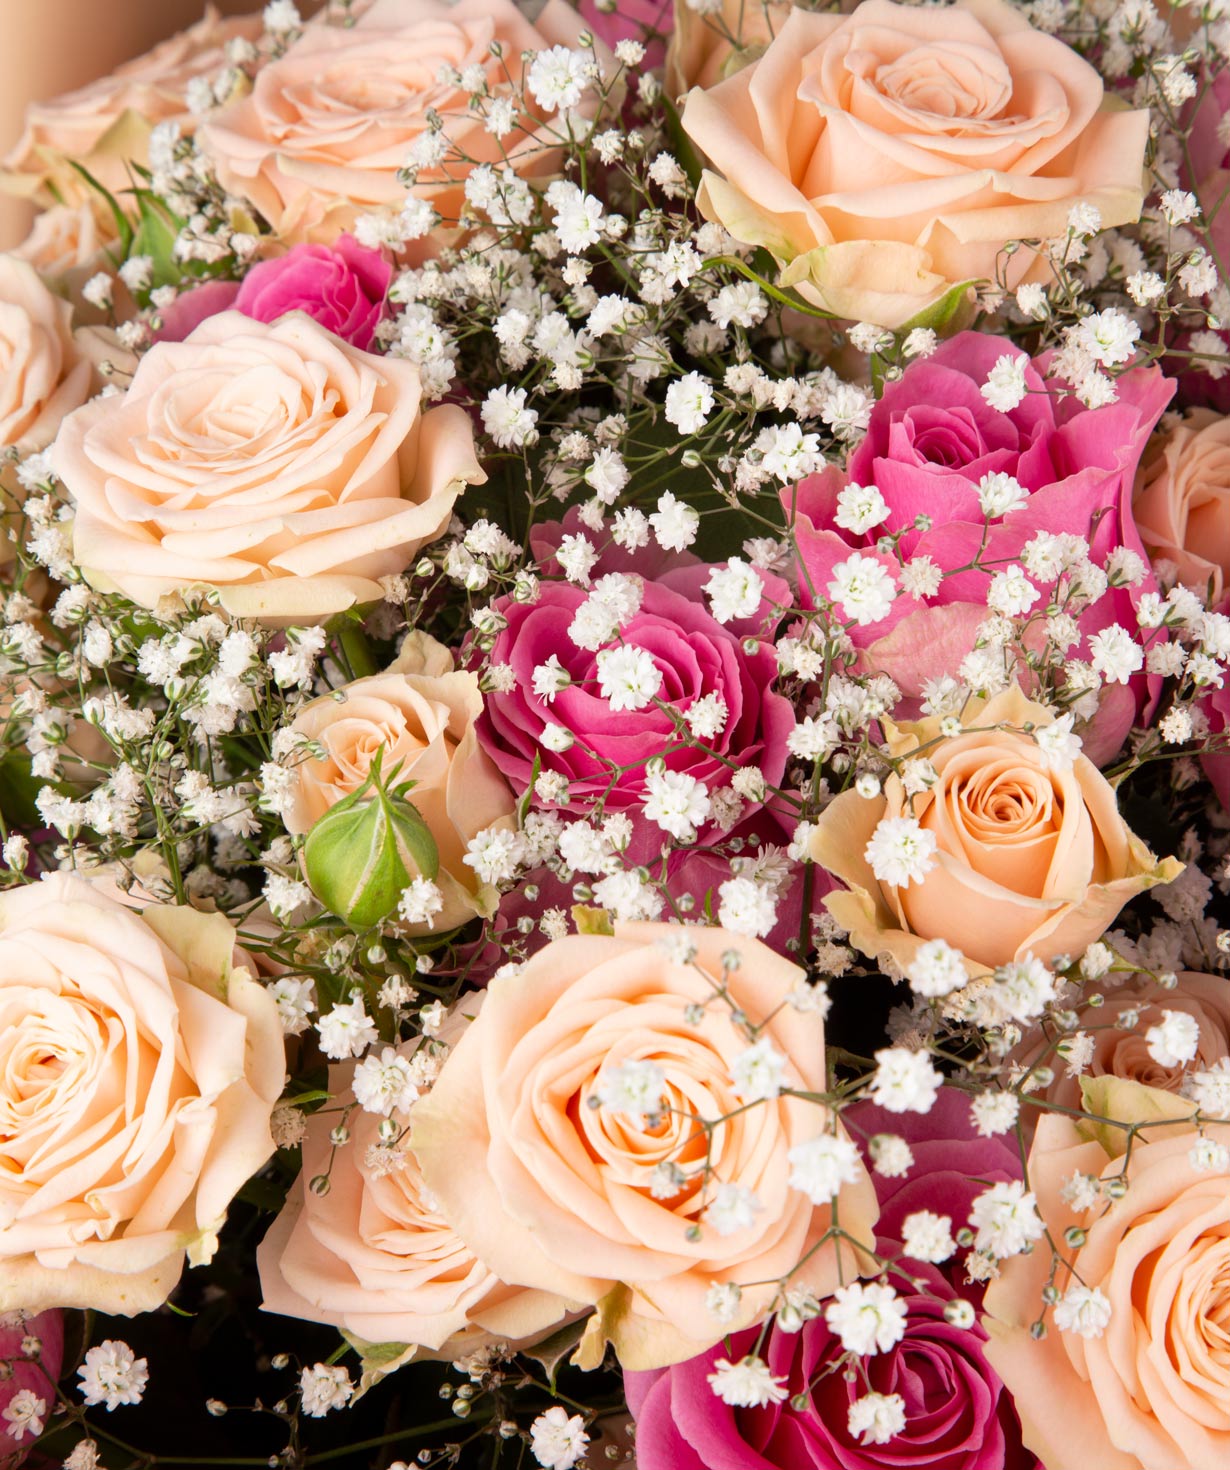 Bouquet `Cairns` wit roses and gypsophila